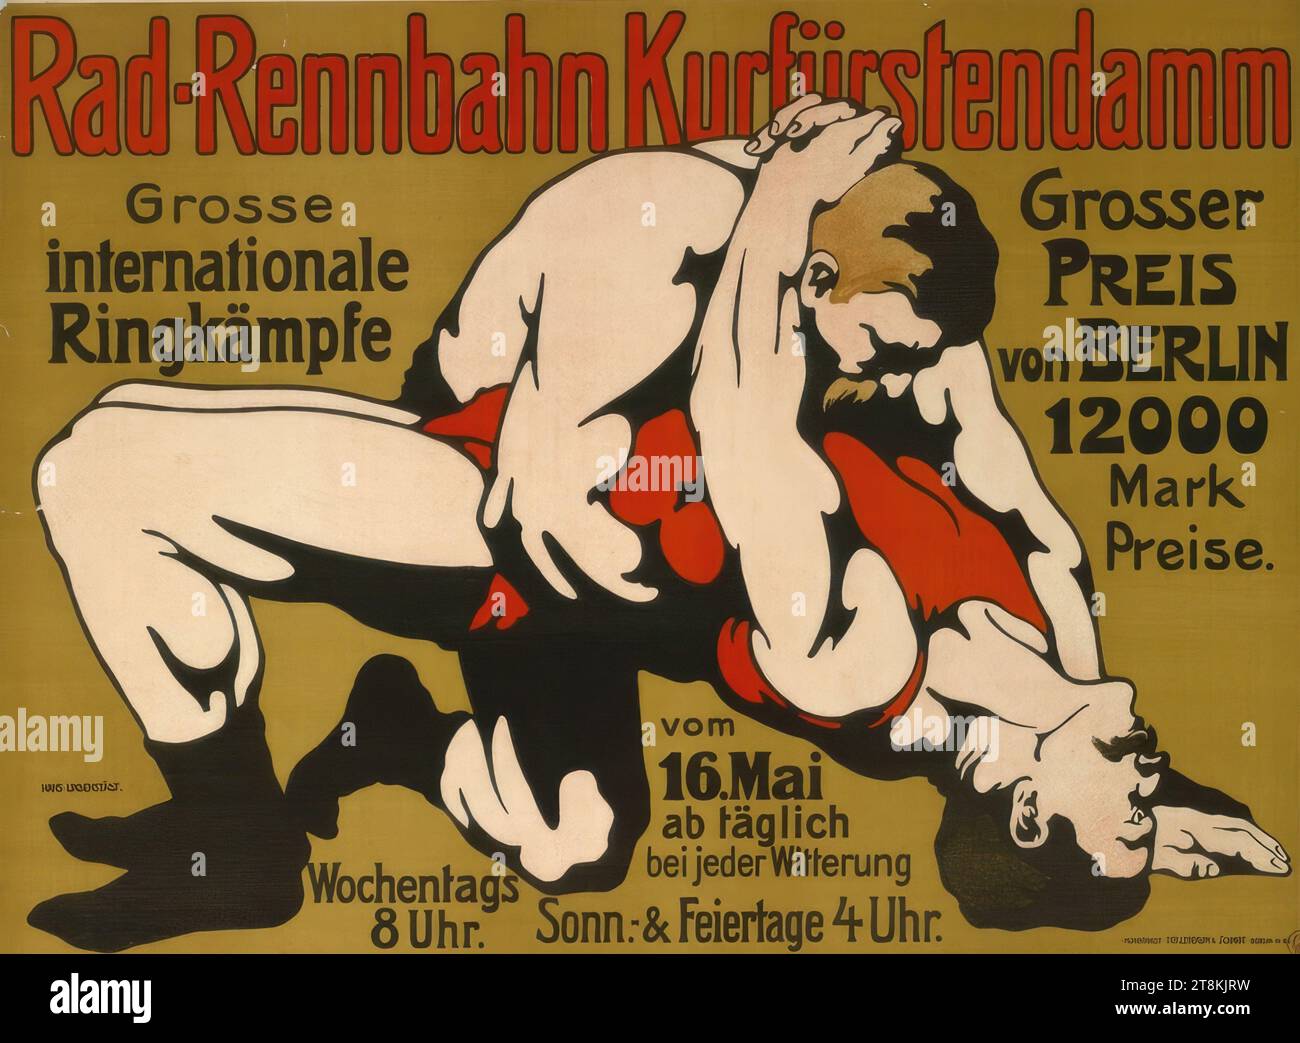 Kurfürstendamm cycle track; Large international wrestling matches, Hans Lindenstaedt, Germany, 1874 - 1928, around 1900, print, color lithograph, sheet: 710 mm x 950 mm, right. Stamp 'FSP Stock Photo